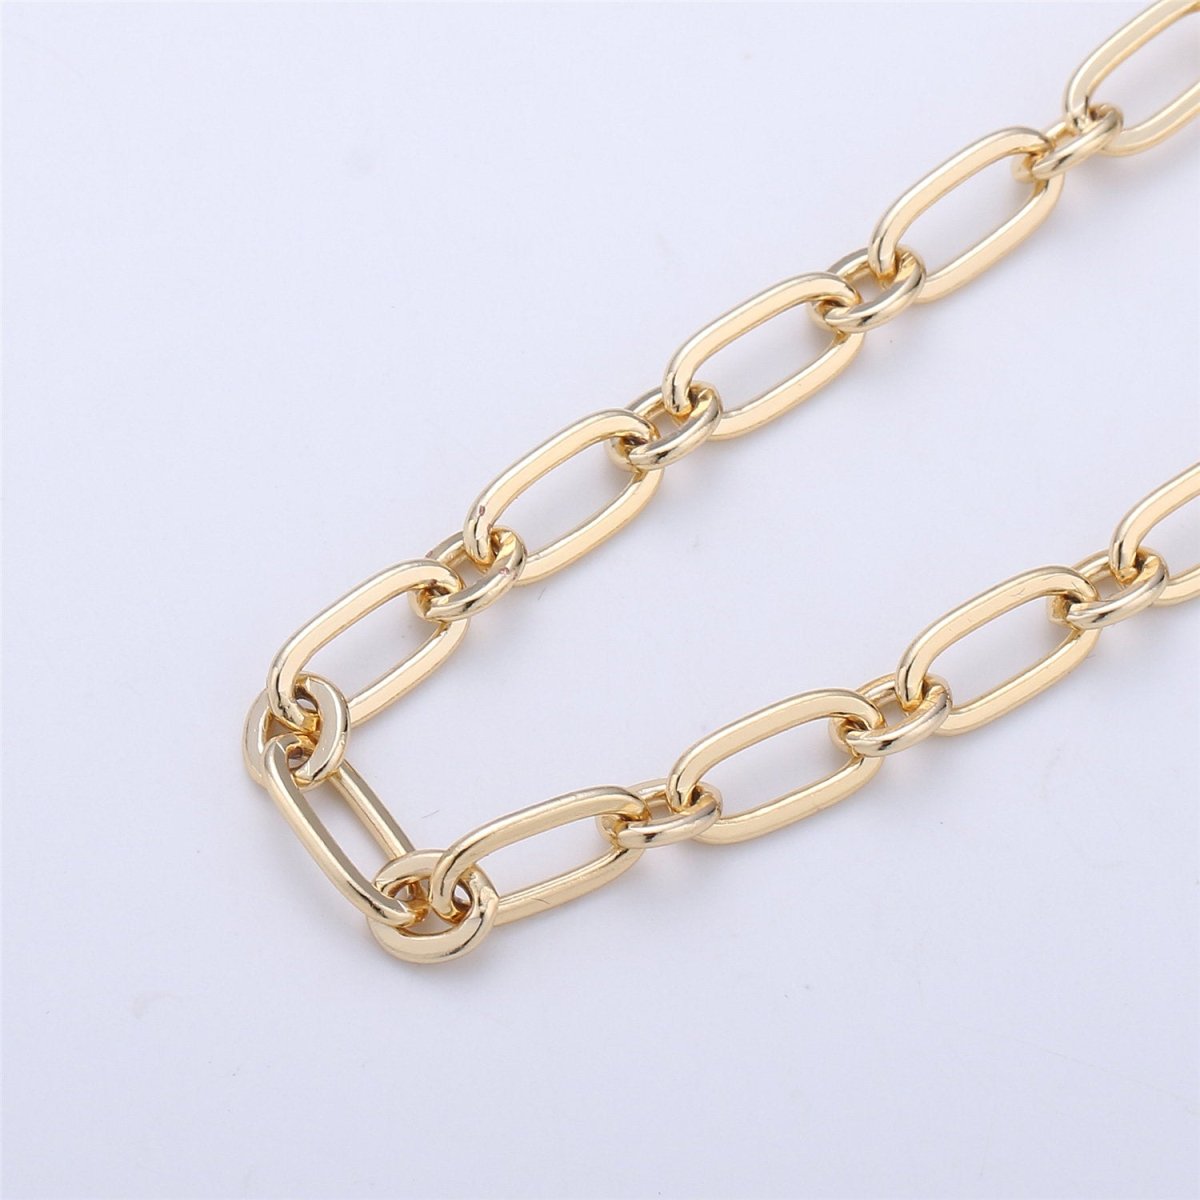 Clearance Price Blowout 24K Gold Filled Chain, 1 Yard / 3 Feet Oval Link Chain for Necklace, 10x3mm PAPER CLIP Chain for Necklace Bracelet Anklet Component Supply | ROLL-004 - DLUXCA